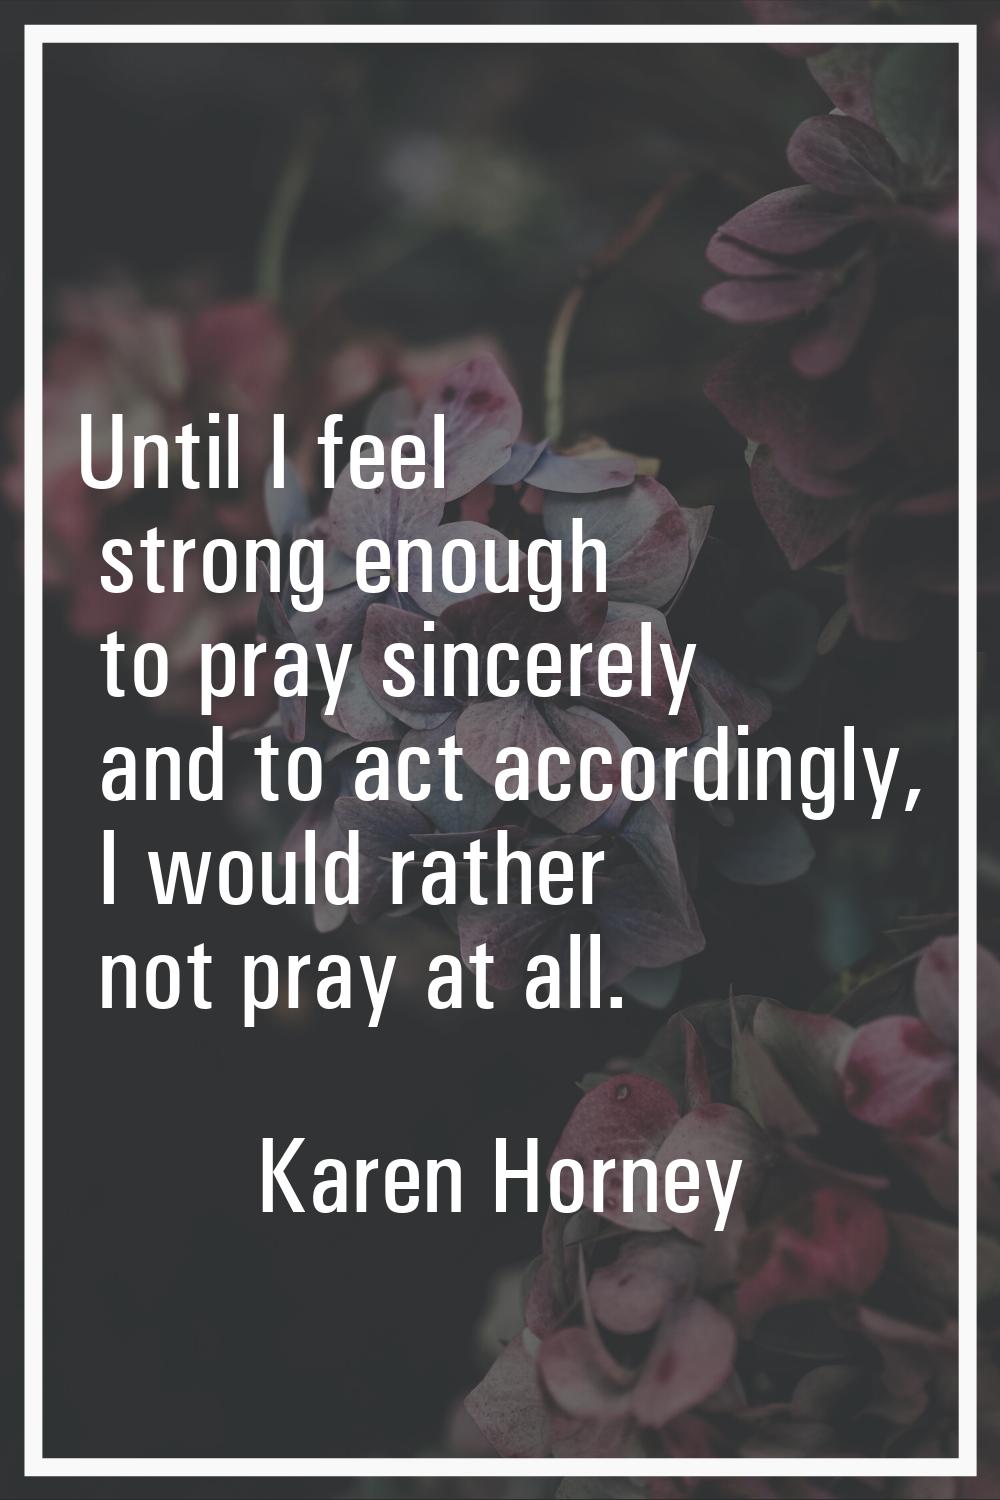 Until I feel strong enough to pray sincerely and to act accordingly, I would rather not pray at all